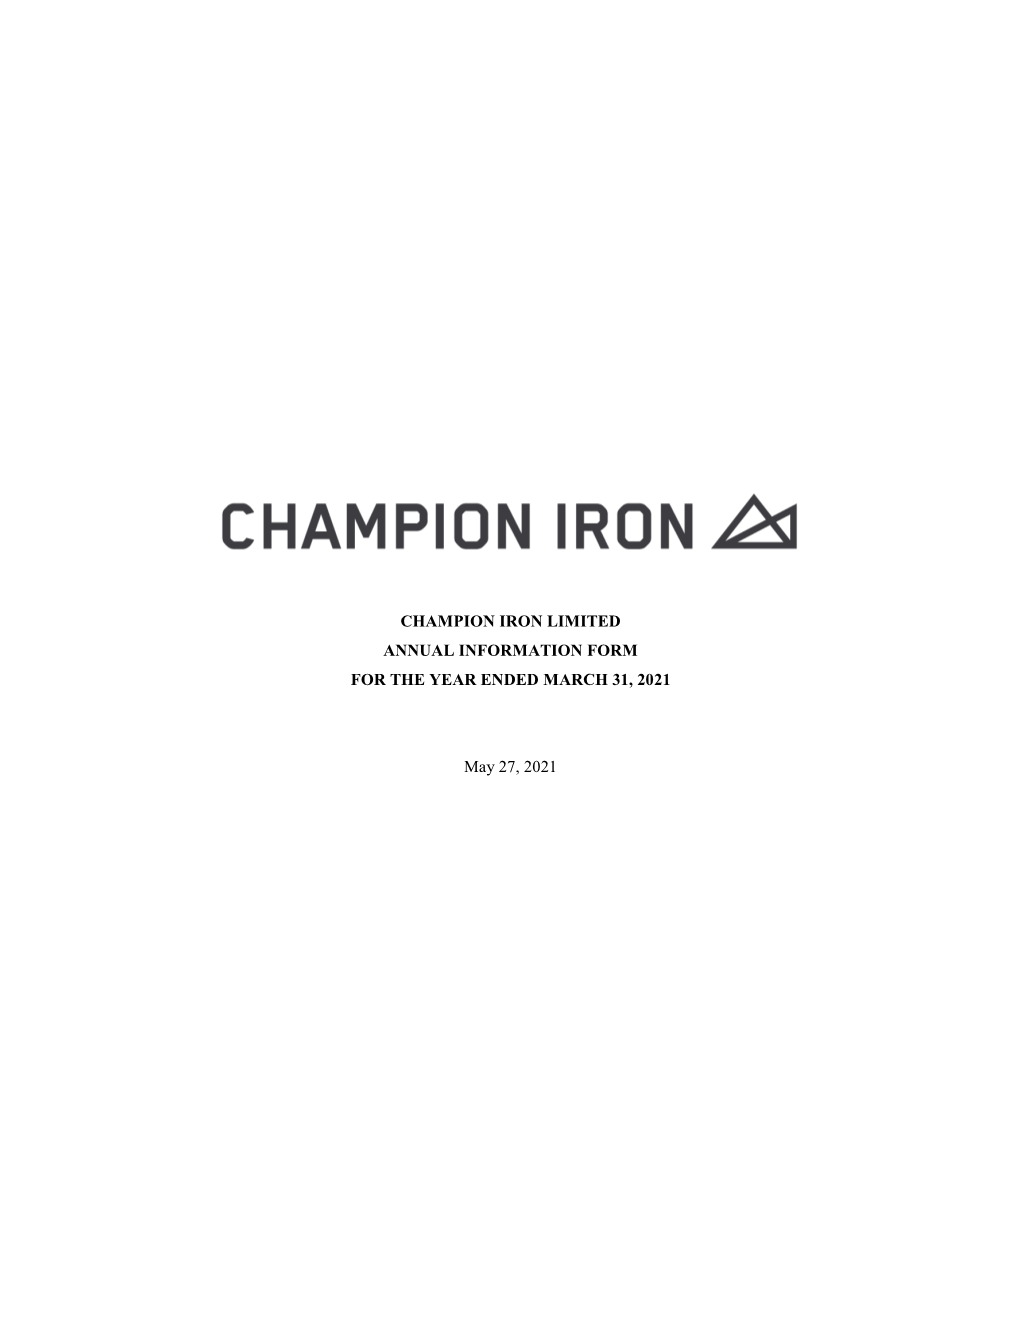 Champion Iron Limited Annual Information Form for the Year Ended March 31, 2021